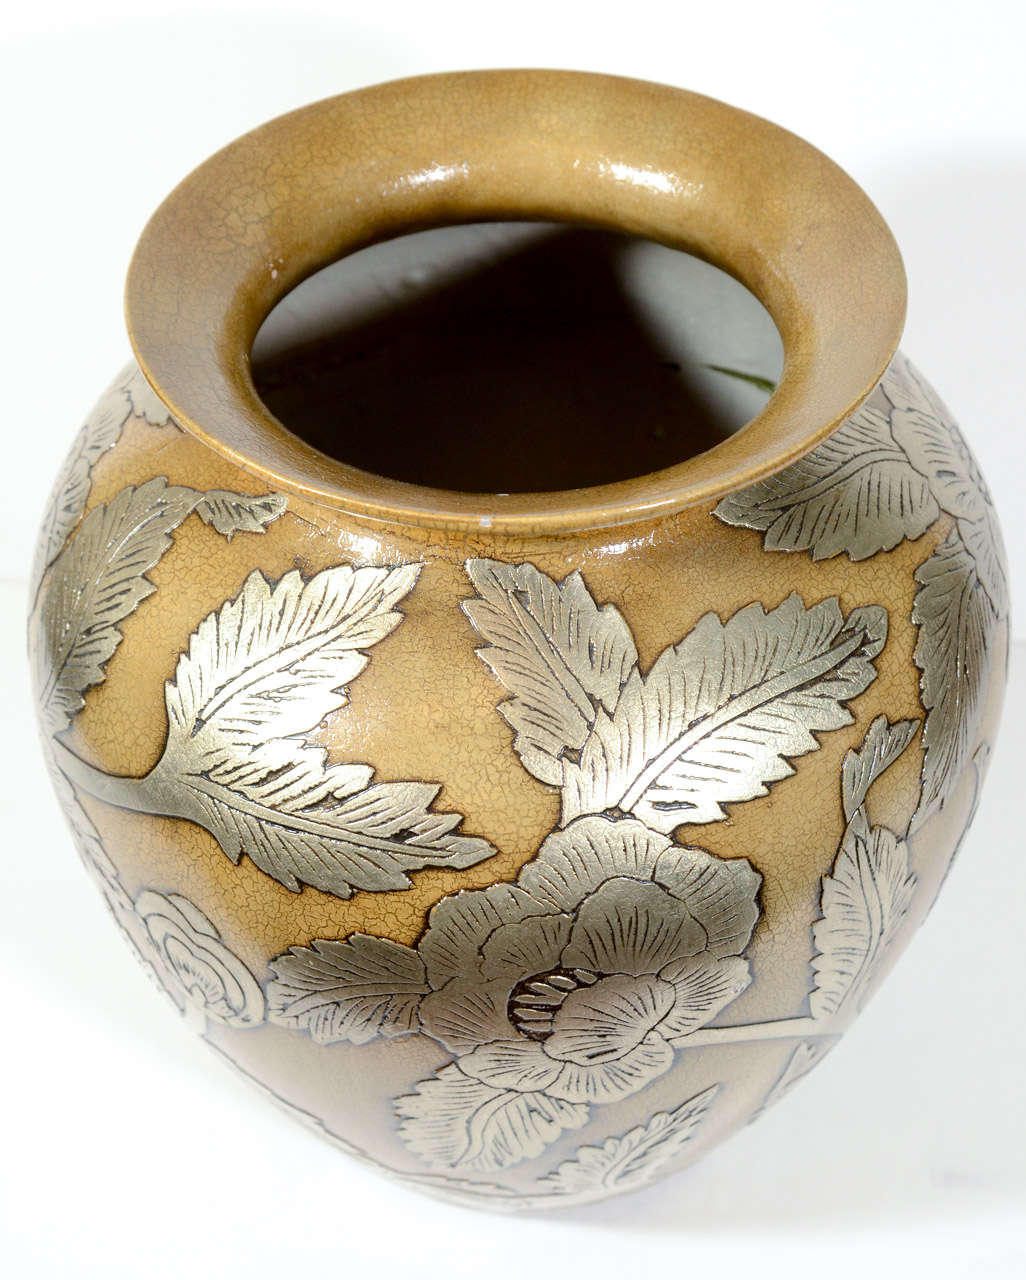 20th Century Ceramic Pottery Urn Vase with Relief Designs in Silver Leaf